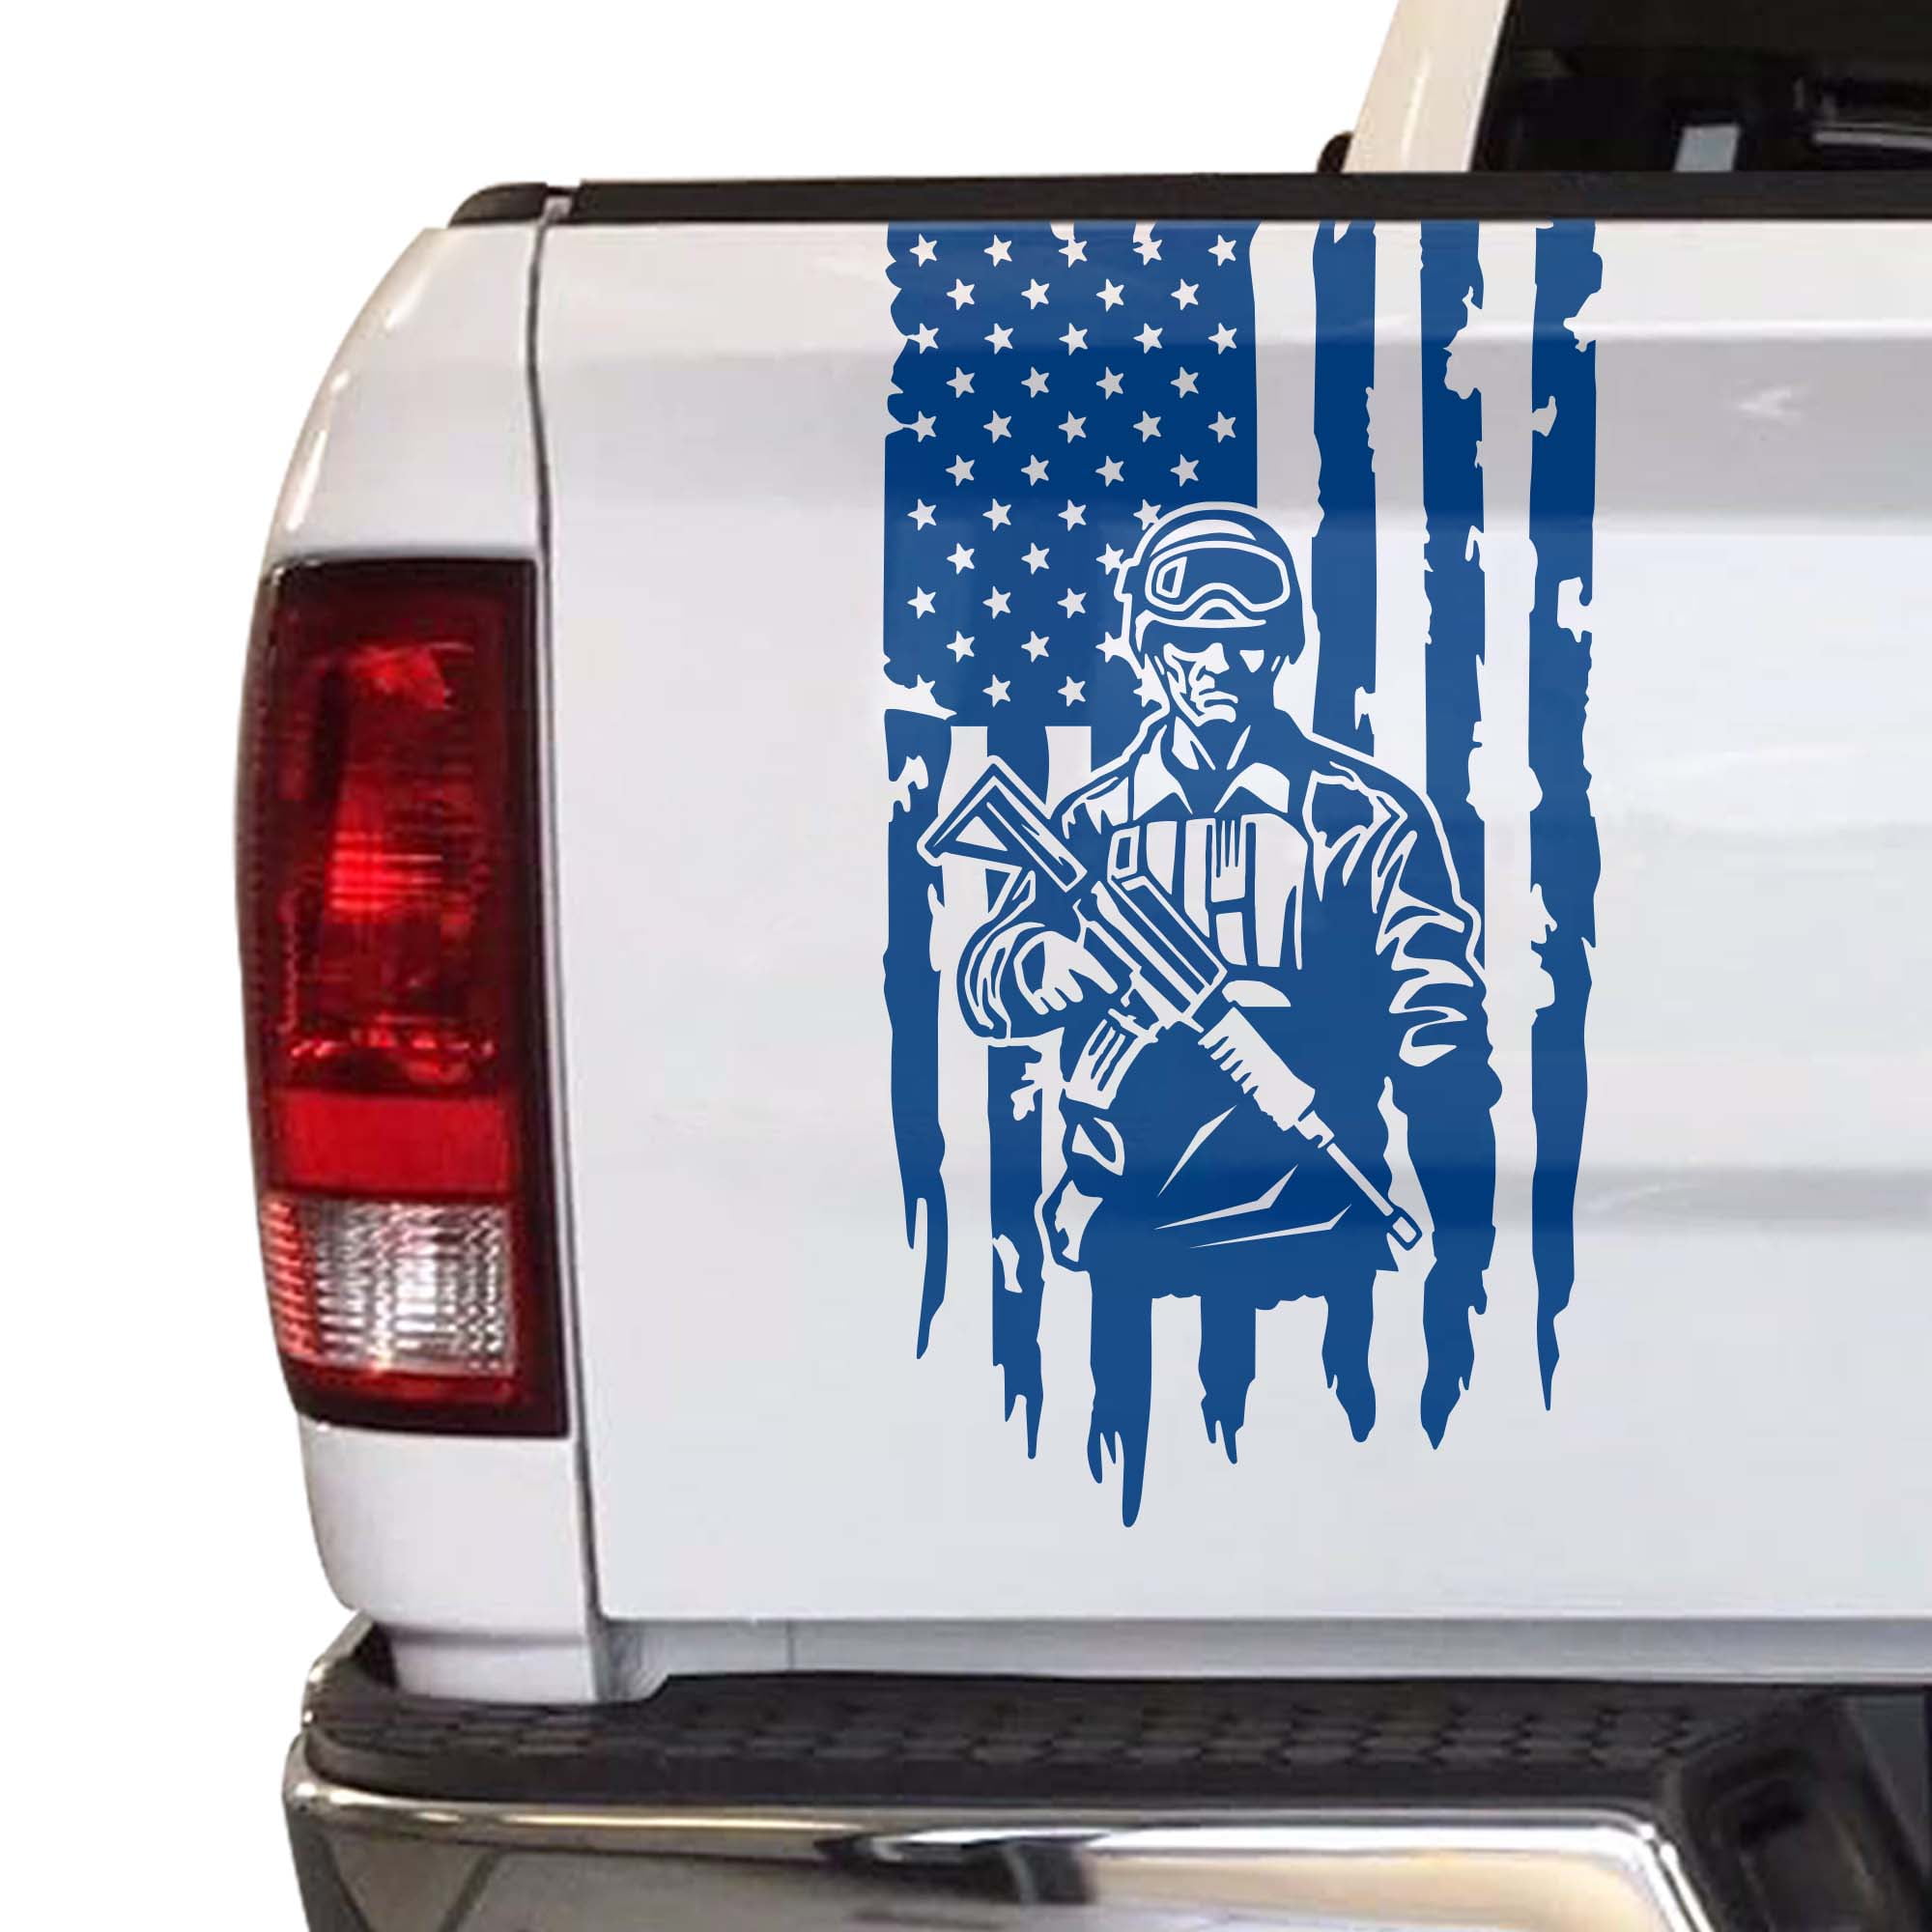 Soldier Enlisted Man Fighter U.S. Army USMC USAF Distressed American USA US  Flag Truck Tailgate Vinyl Decal Fits most Pickup Trucks Military Sticker  Veteran Retired (11 x 20, Dark Gray) 